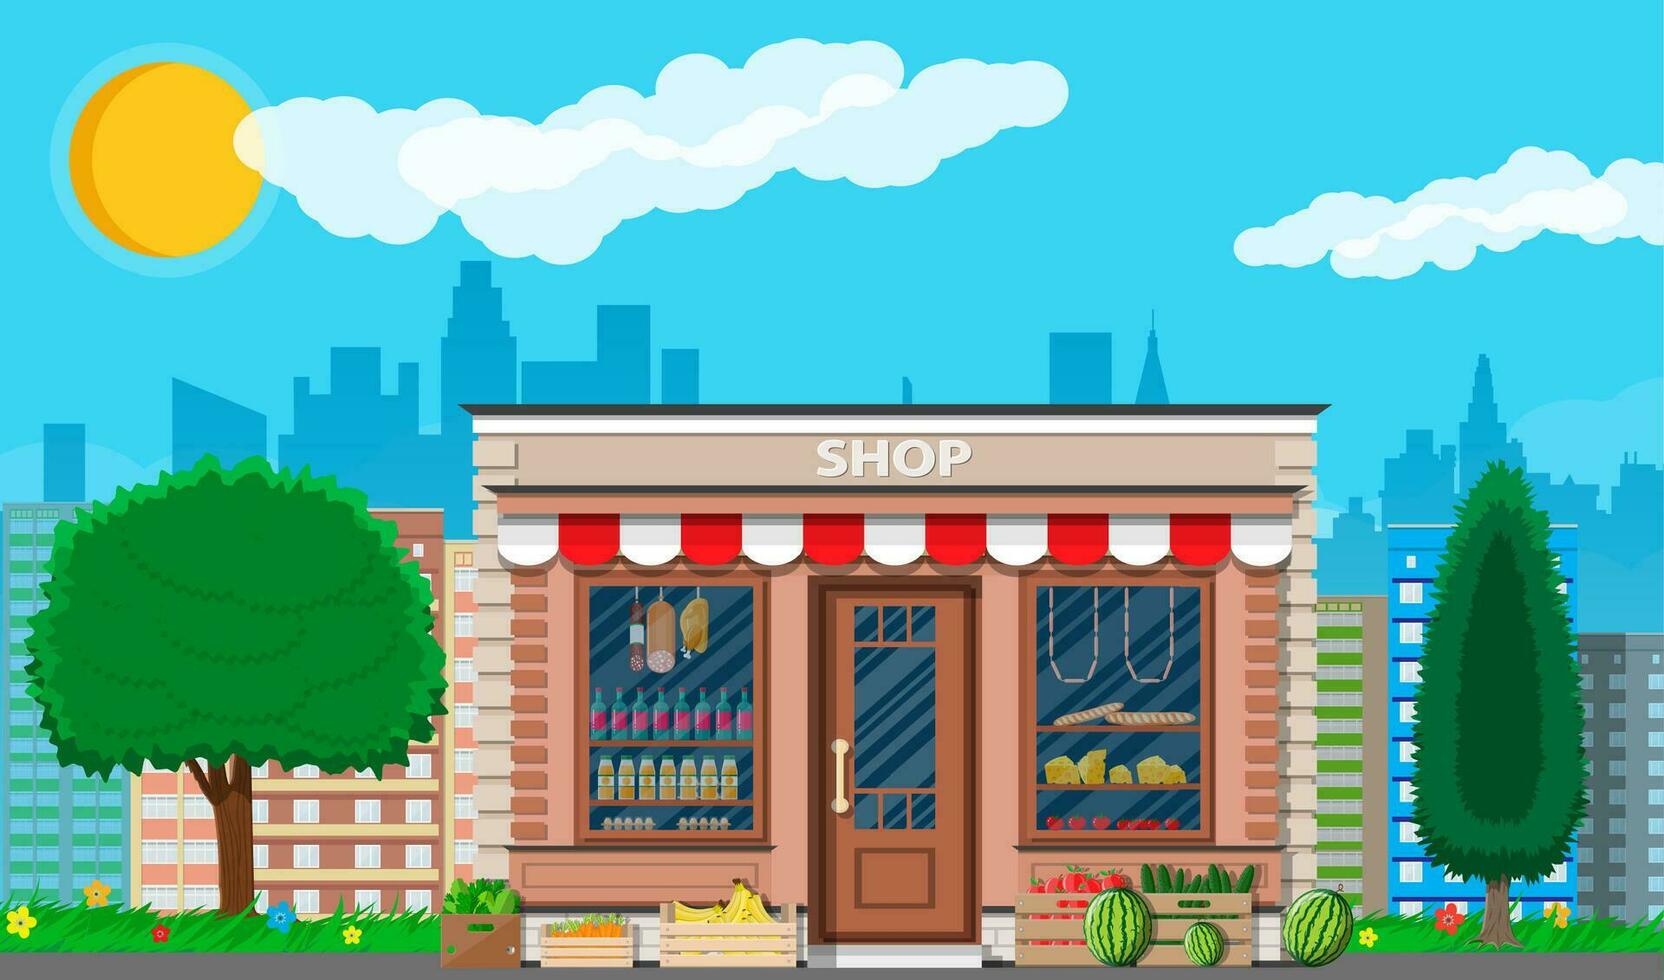 Daily products shop. Local fruit and vegetables store building. Groceries crates in front of storefront. Cityscape, trees, grass, clouds, sun. Vector illustration in flat style